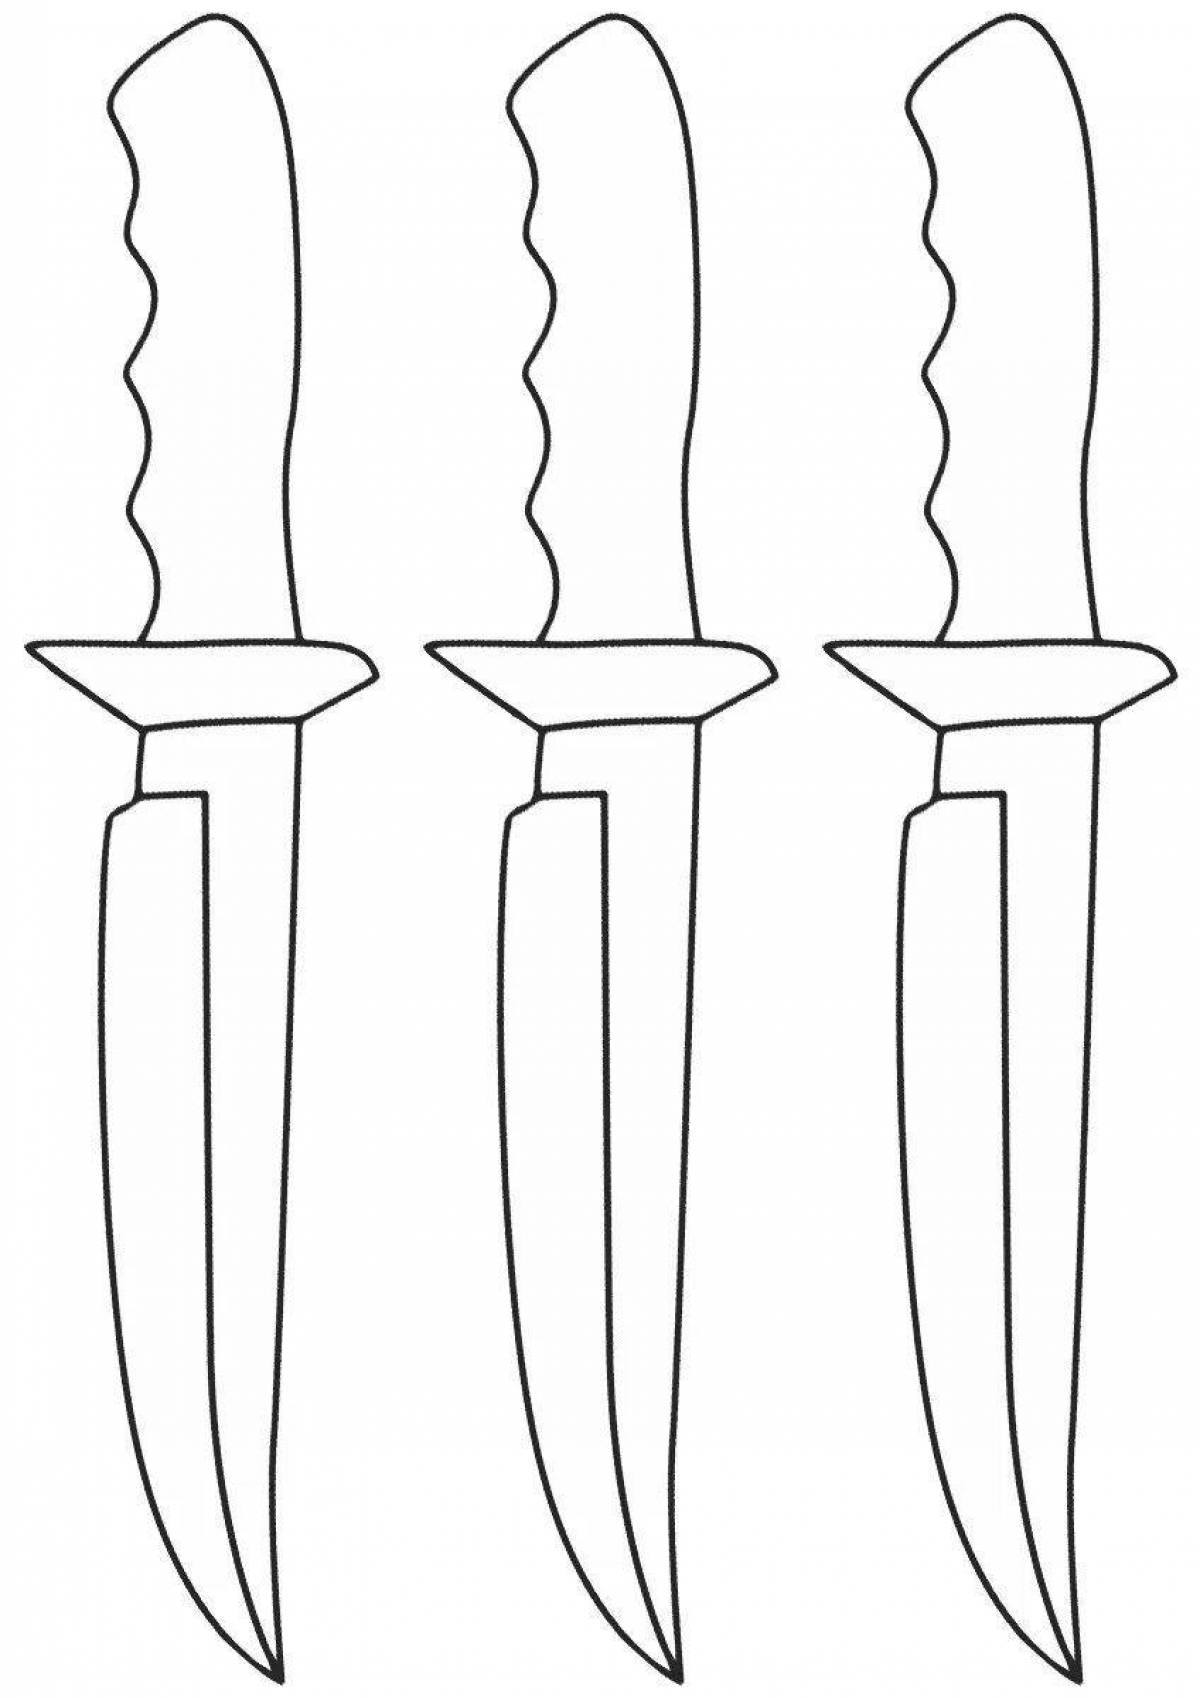 Fun coloring of knives for kids